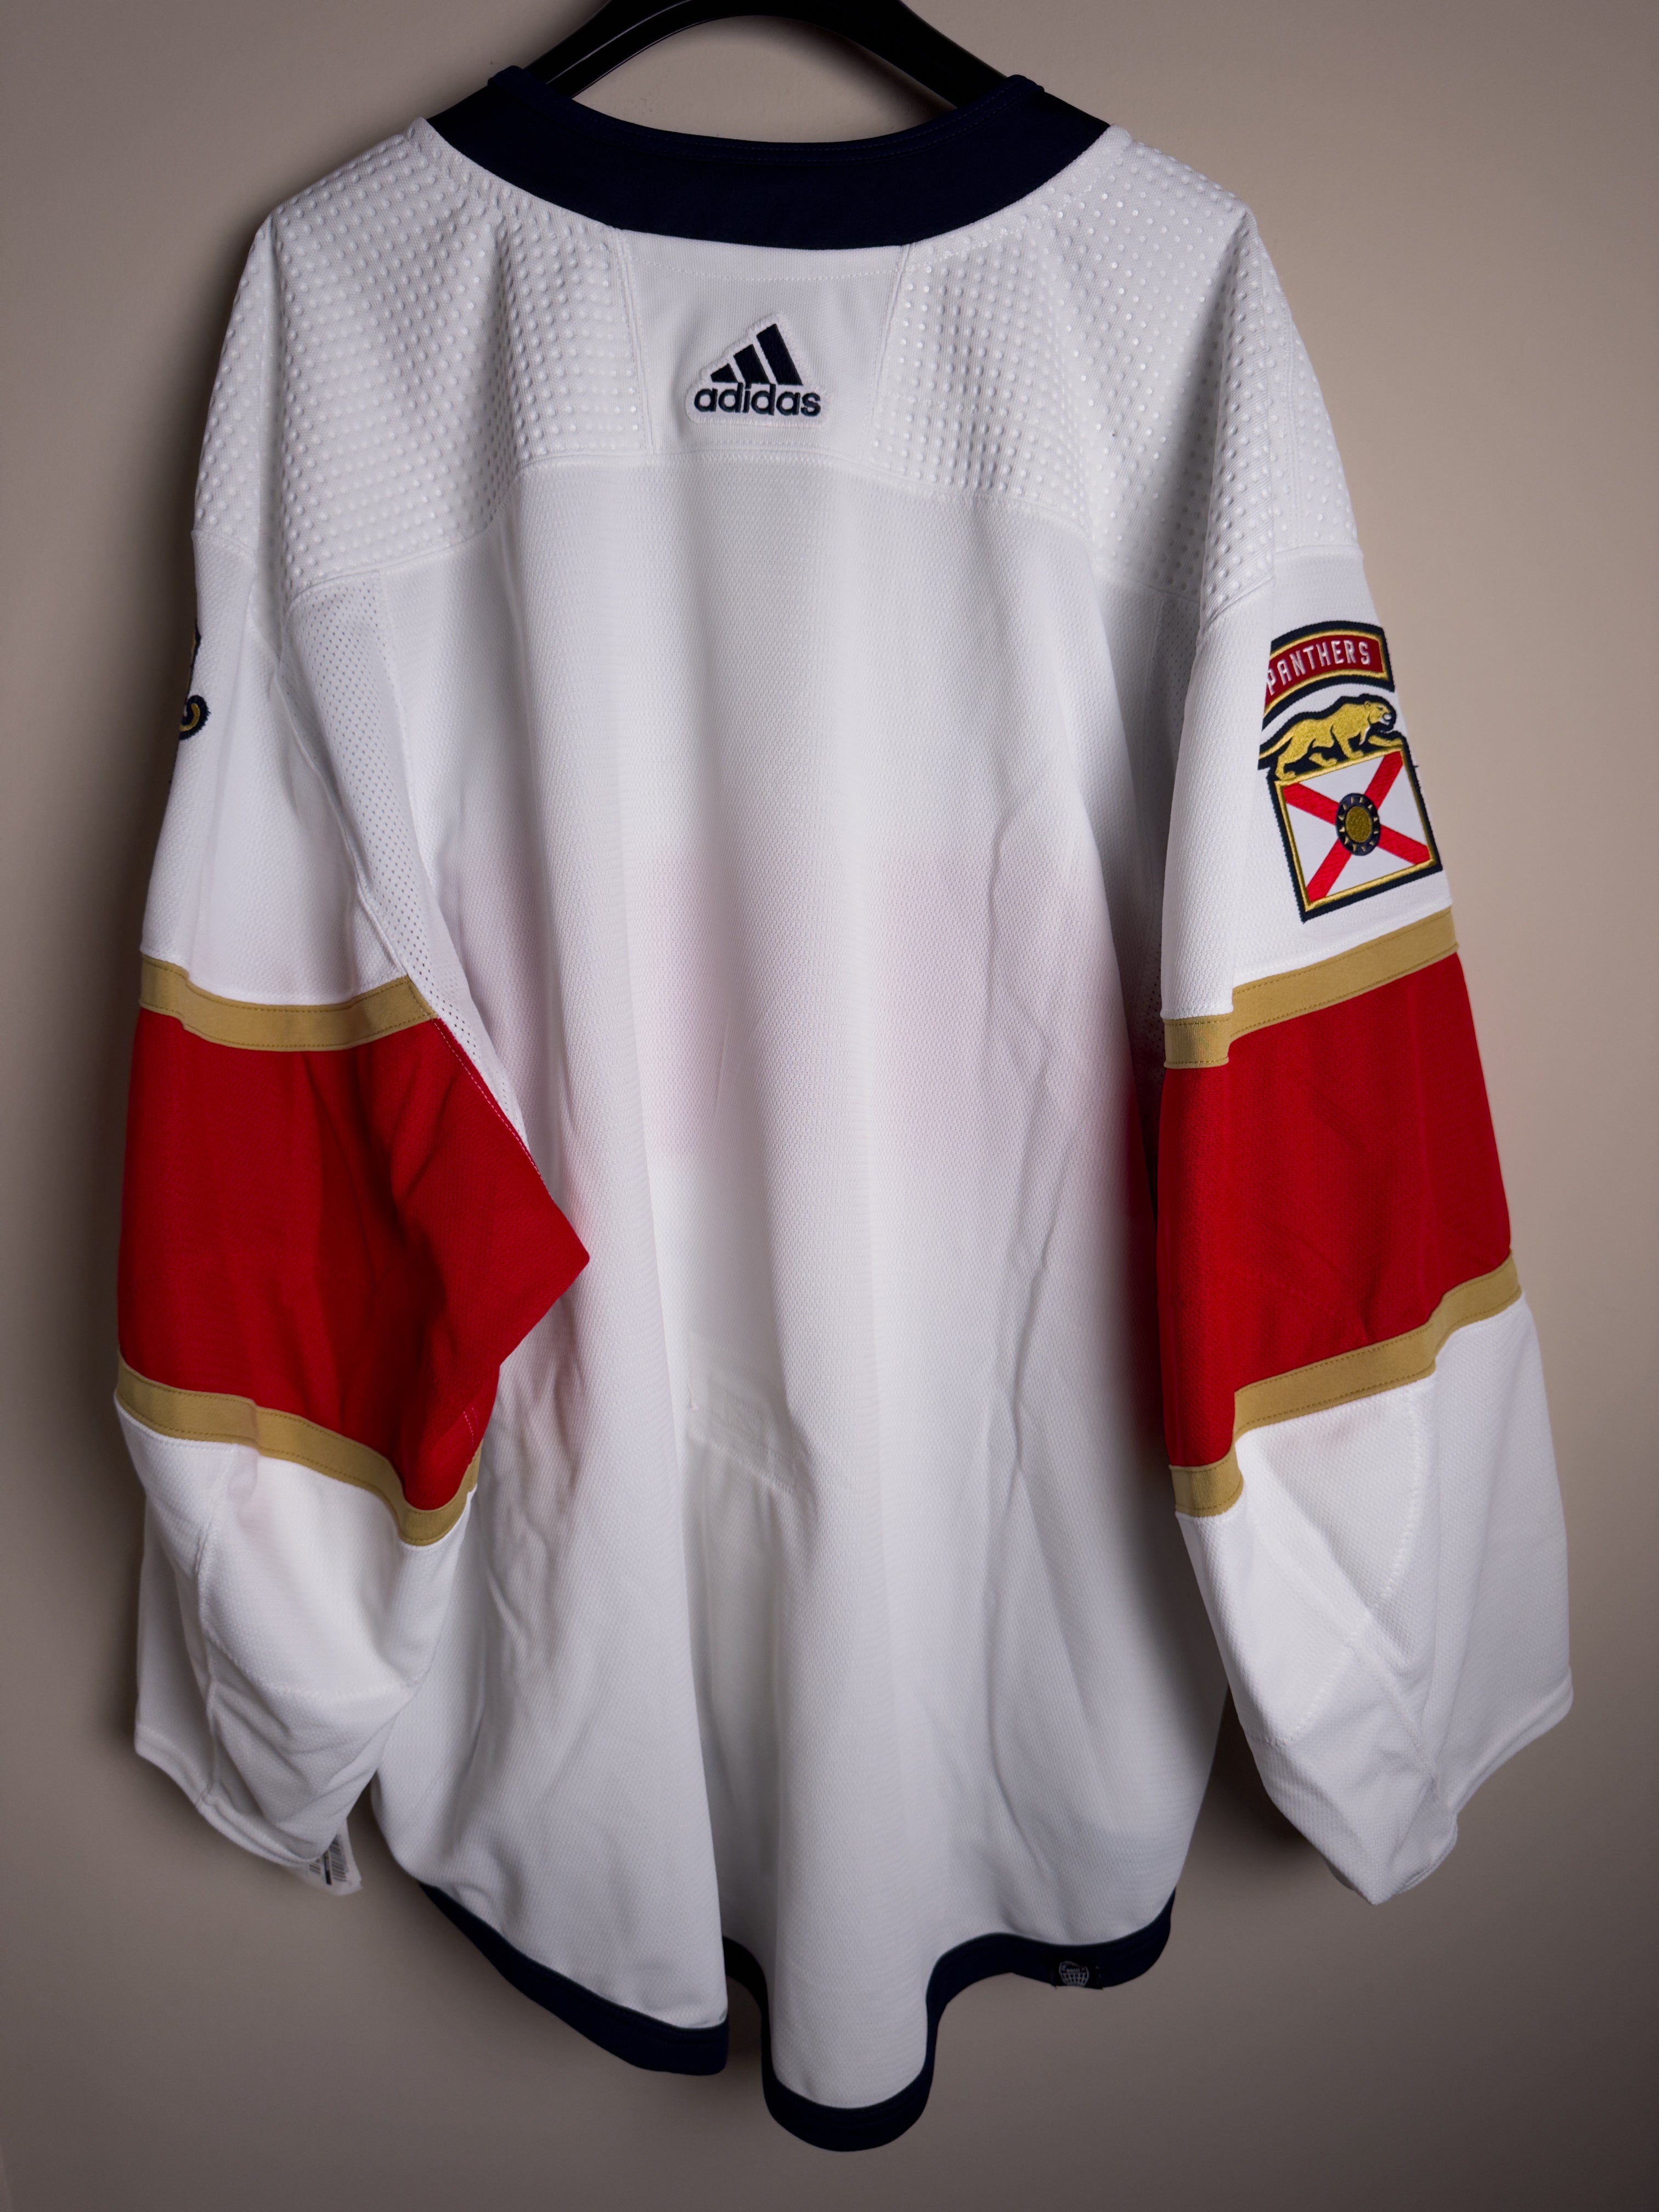 Florida Panthers NHL Adidas Primegreen MiC Team Issued Away Jersey Size 60G (Goalie Cut)